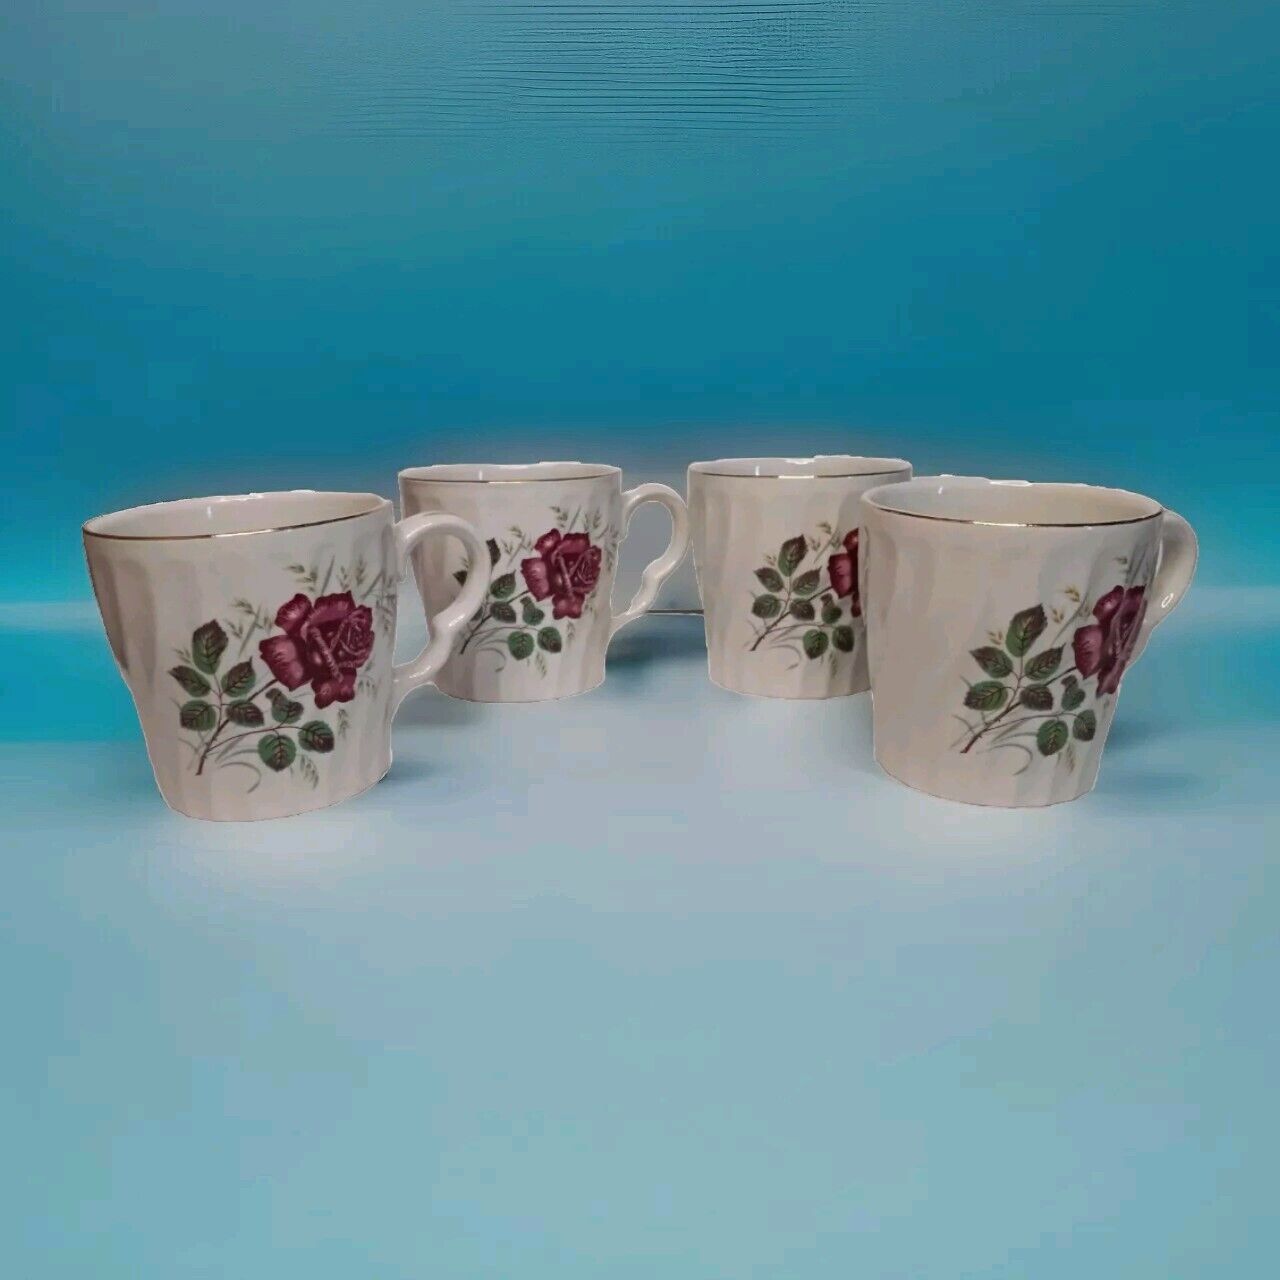 Vintage Anniversary Rose Teacups (4)  Ironstone Ware by Ridgway England 